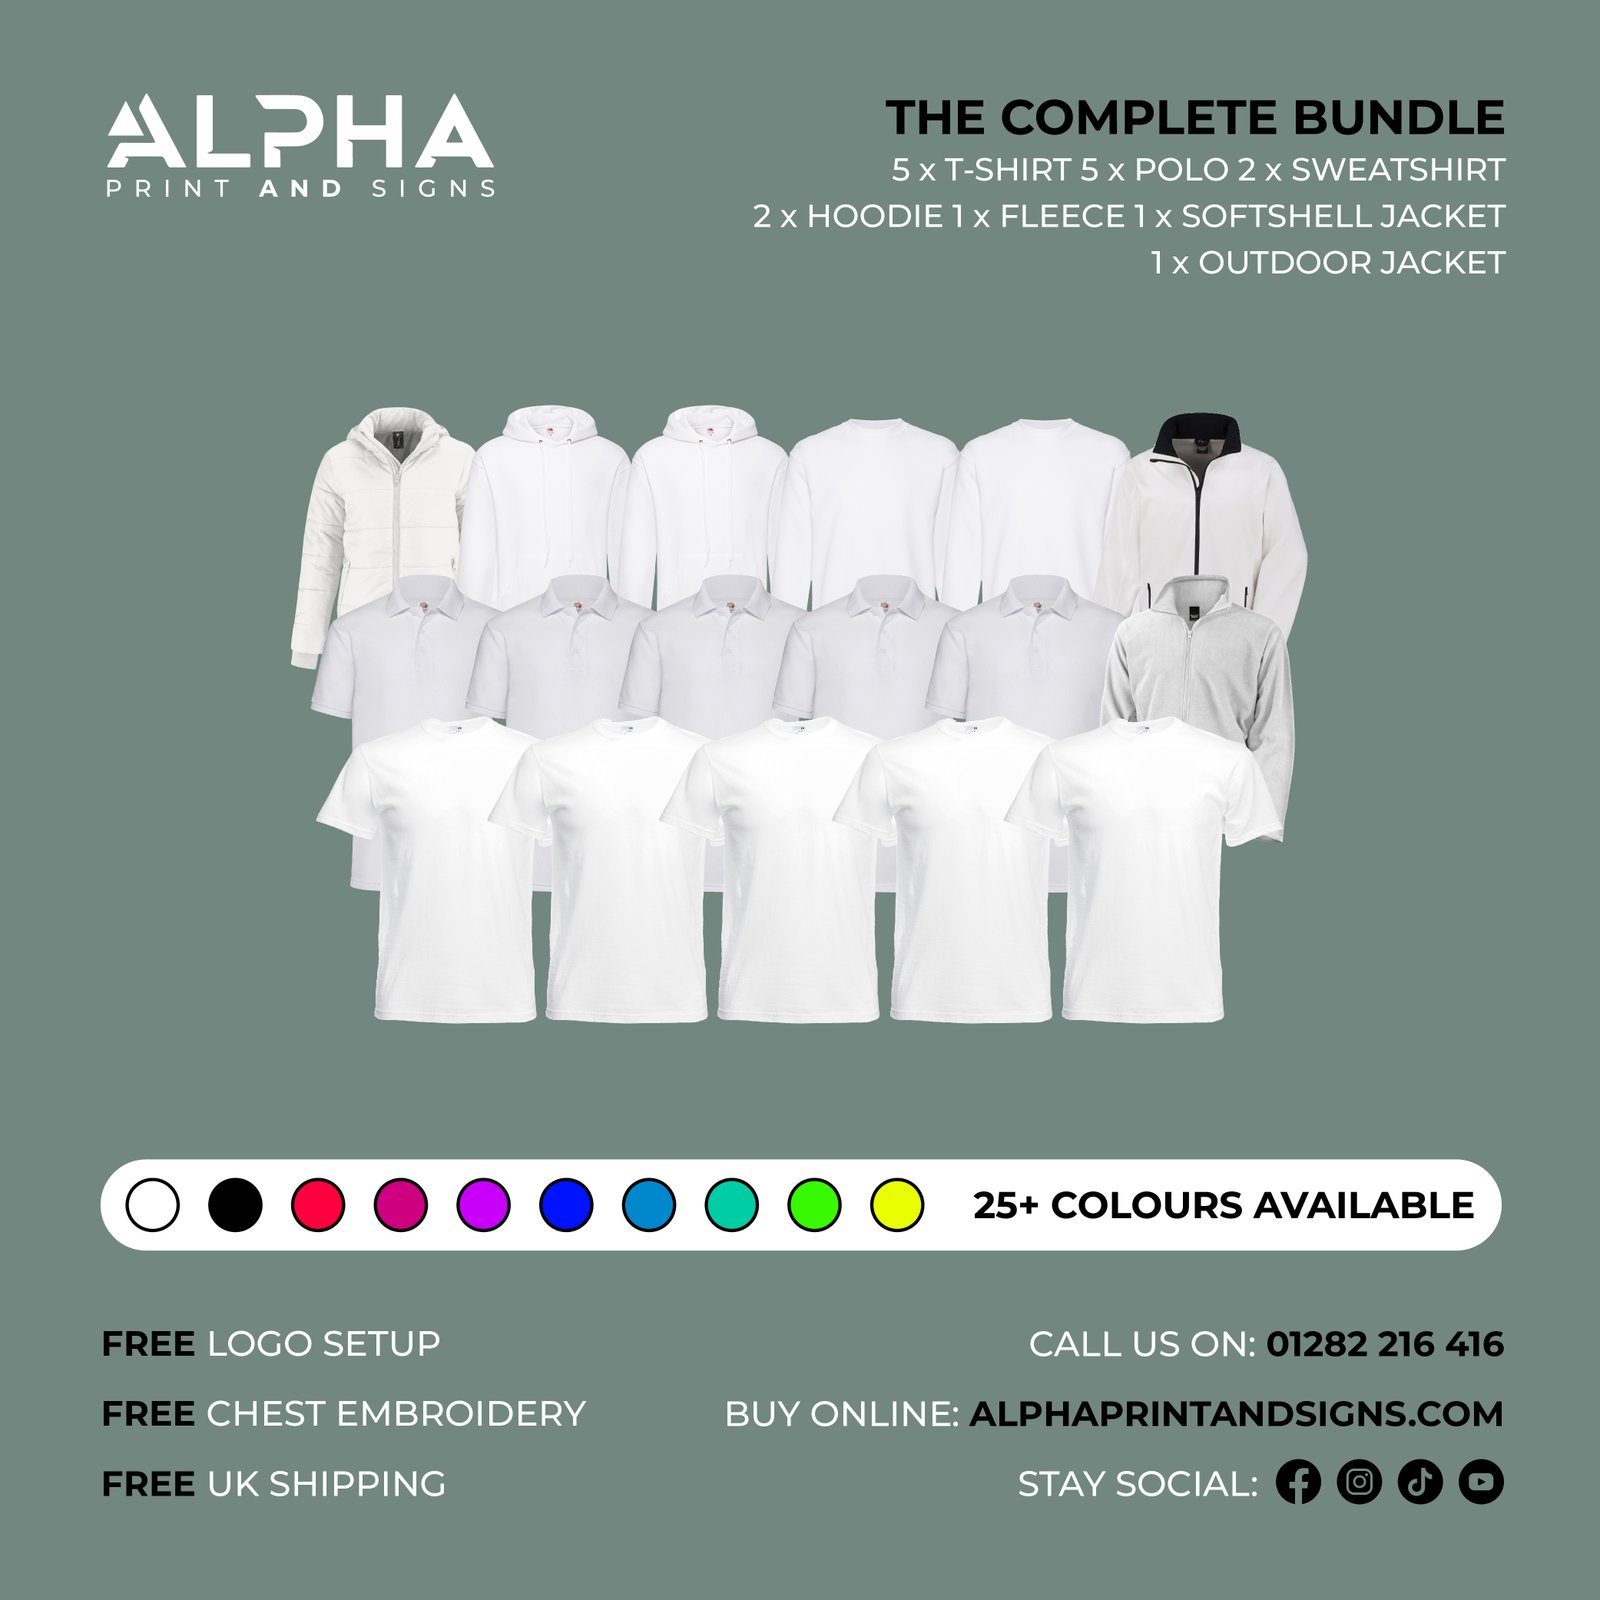 The Complete Embroidered Workwear Bundle